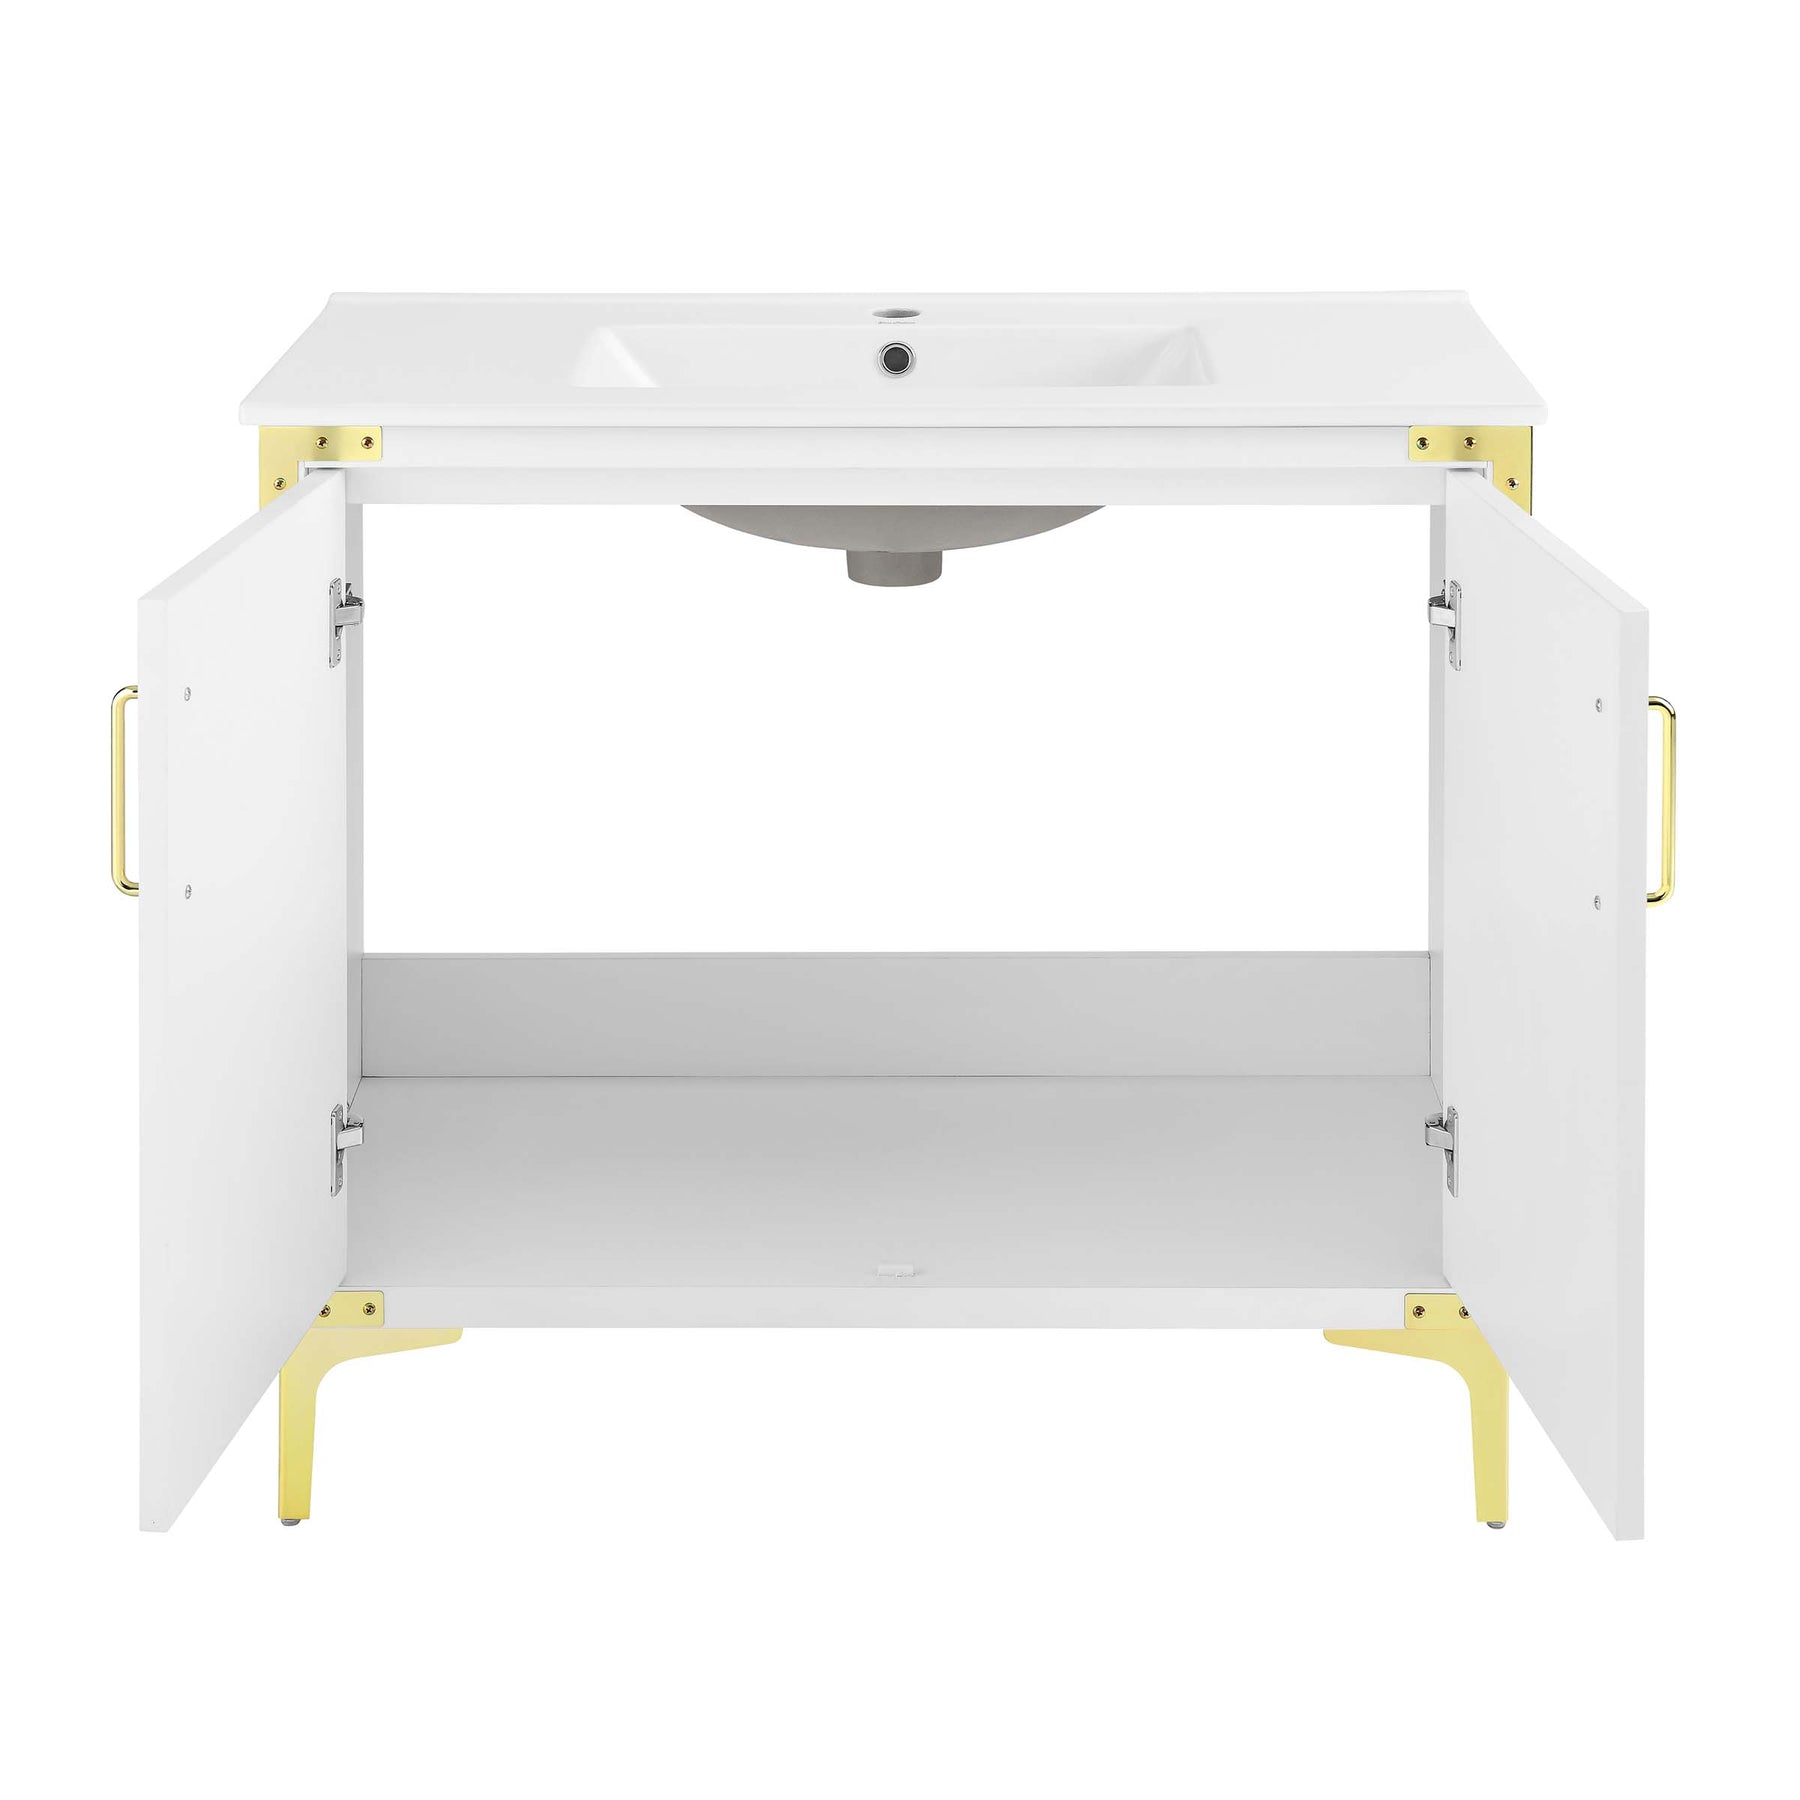 Swiss Madison Voltaire 36" Single, Bathroom Vanity in White with Gold Hardware - SM-BV320